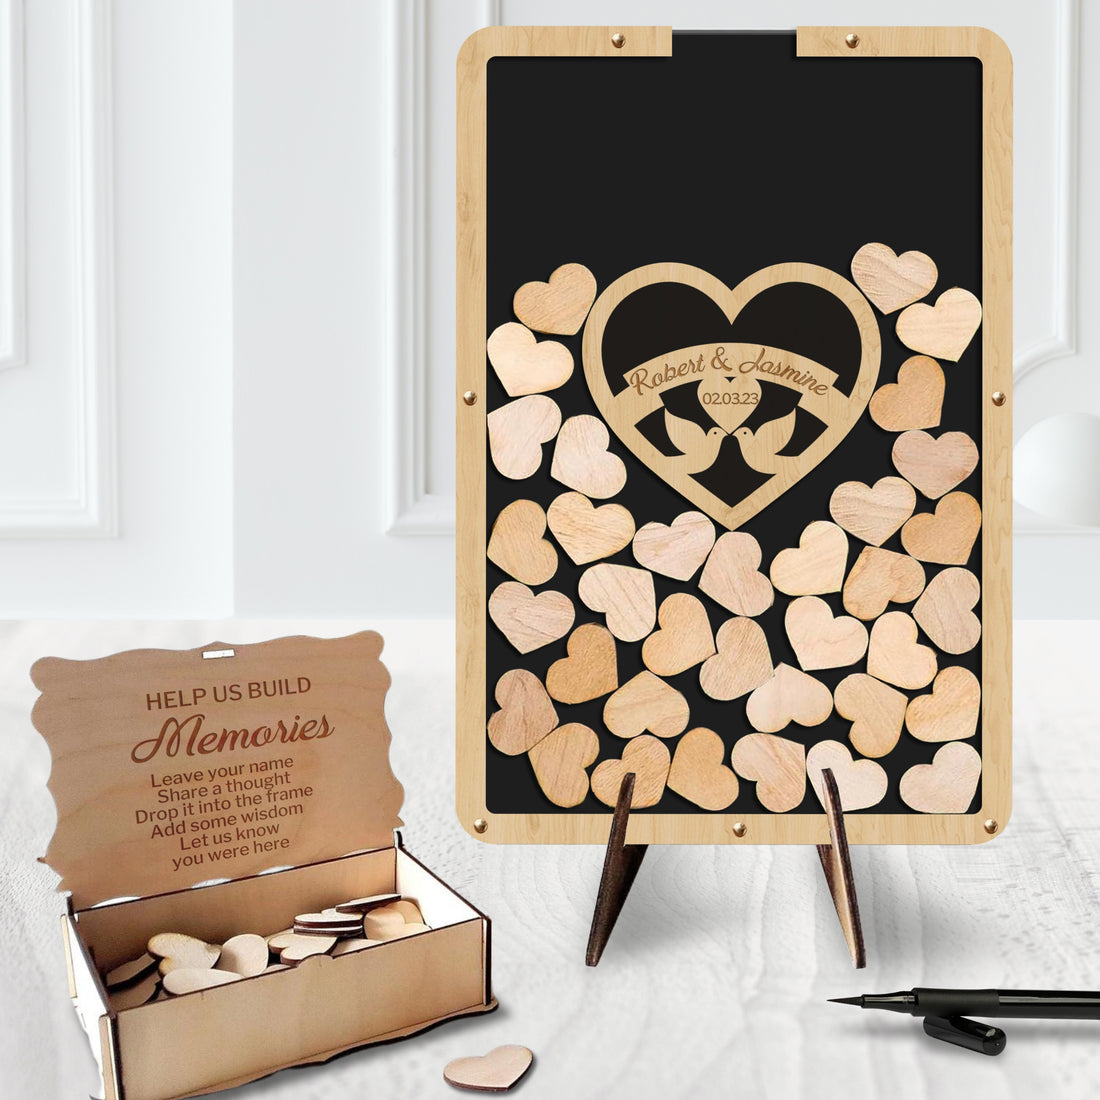 Custom Made Laser Cut Plywood & Acrylic Rectangle Wedding Heart Drop Box, Rustic Personalised Guest Book Alternative, Stationery Table Decor